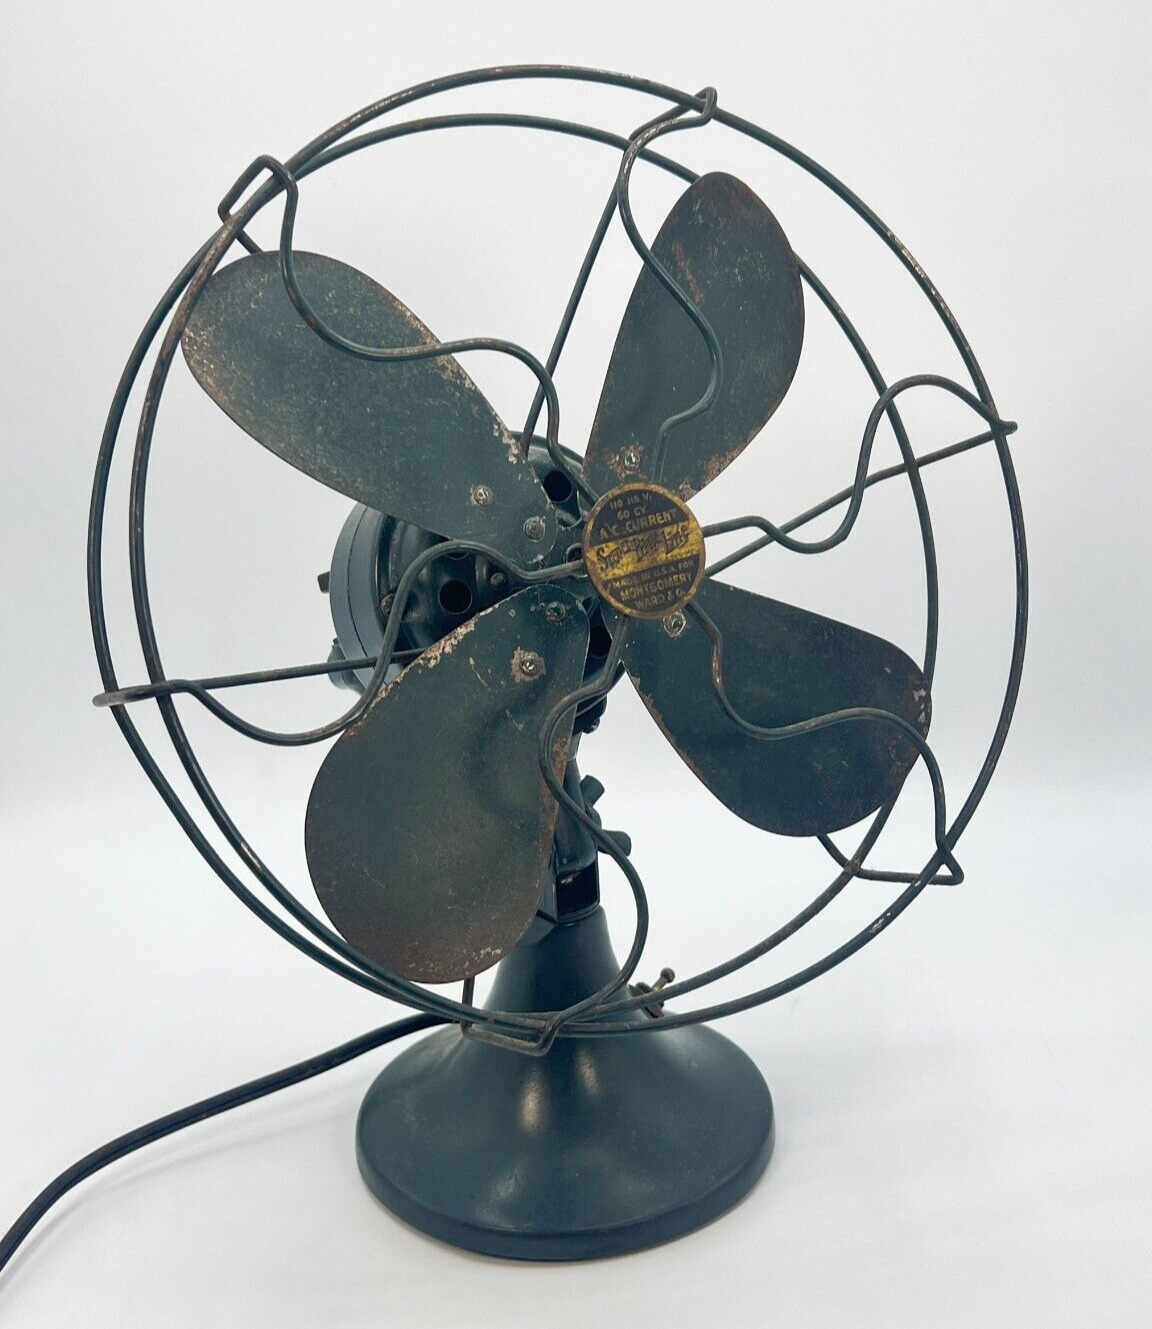 Rare Working 1930\'s 11” Oscillating Table Fan \